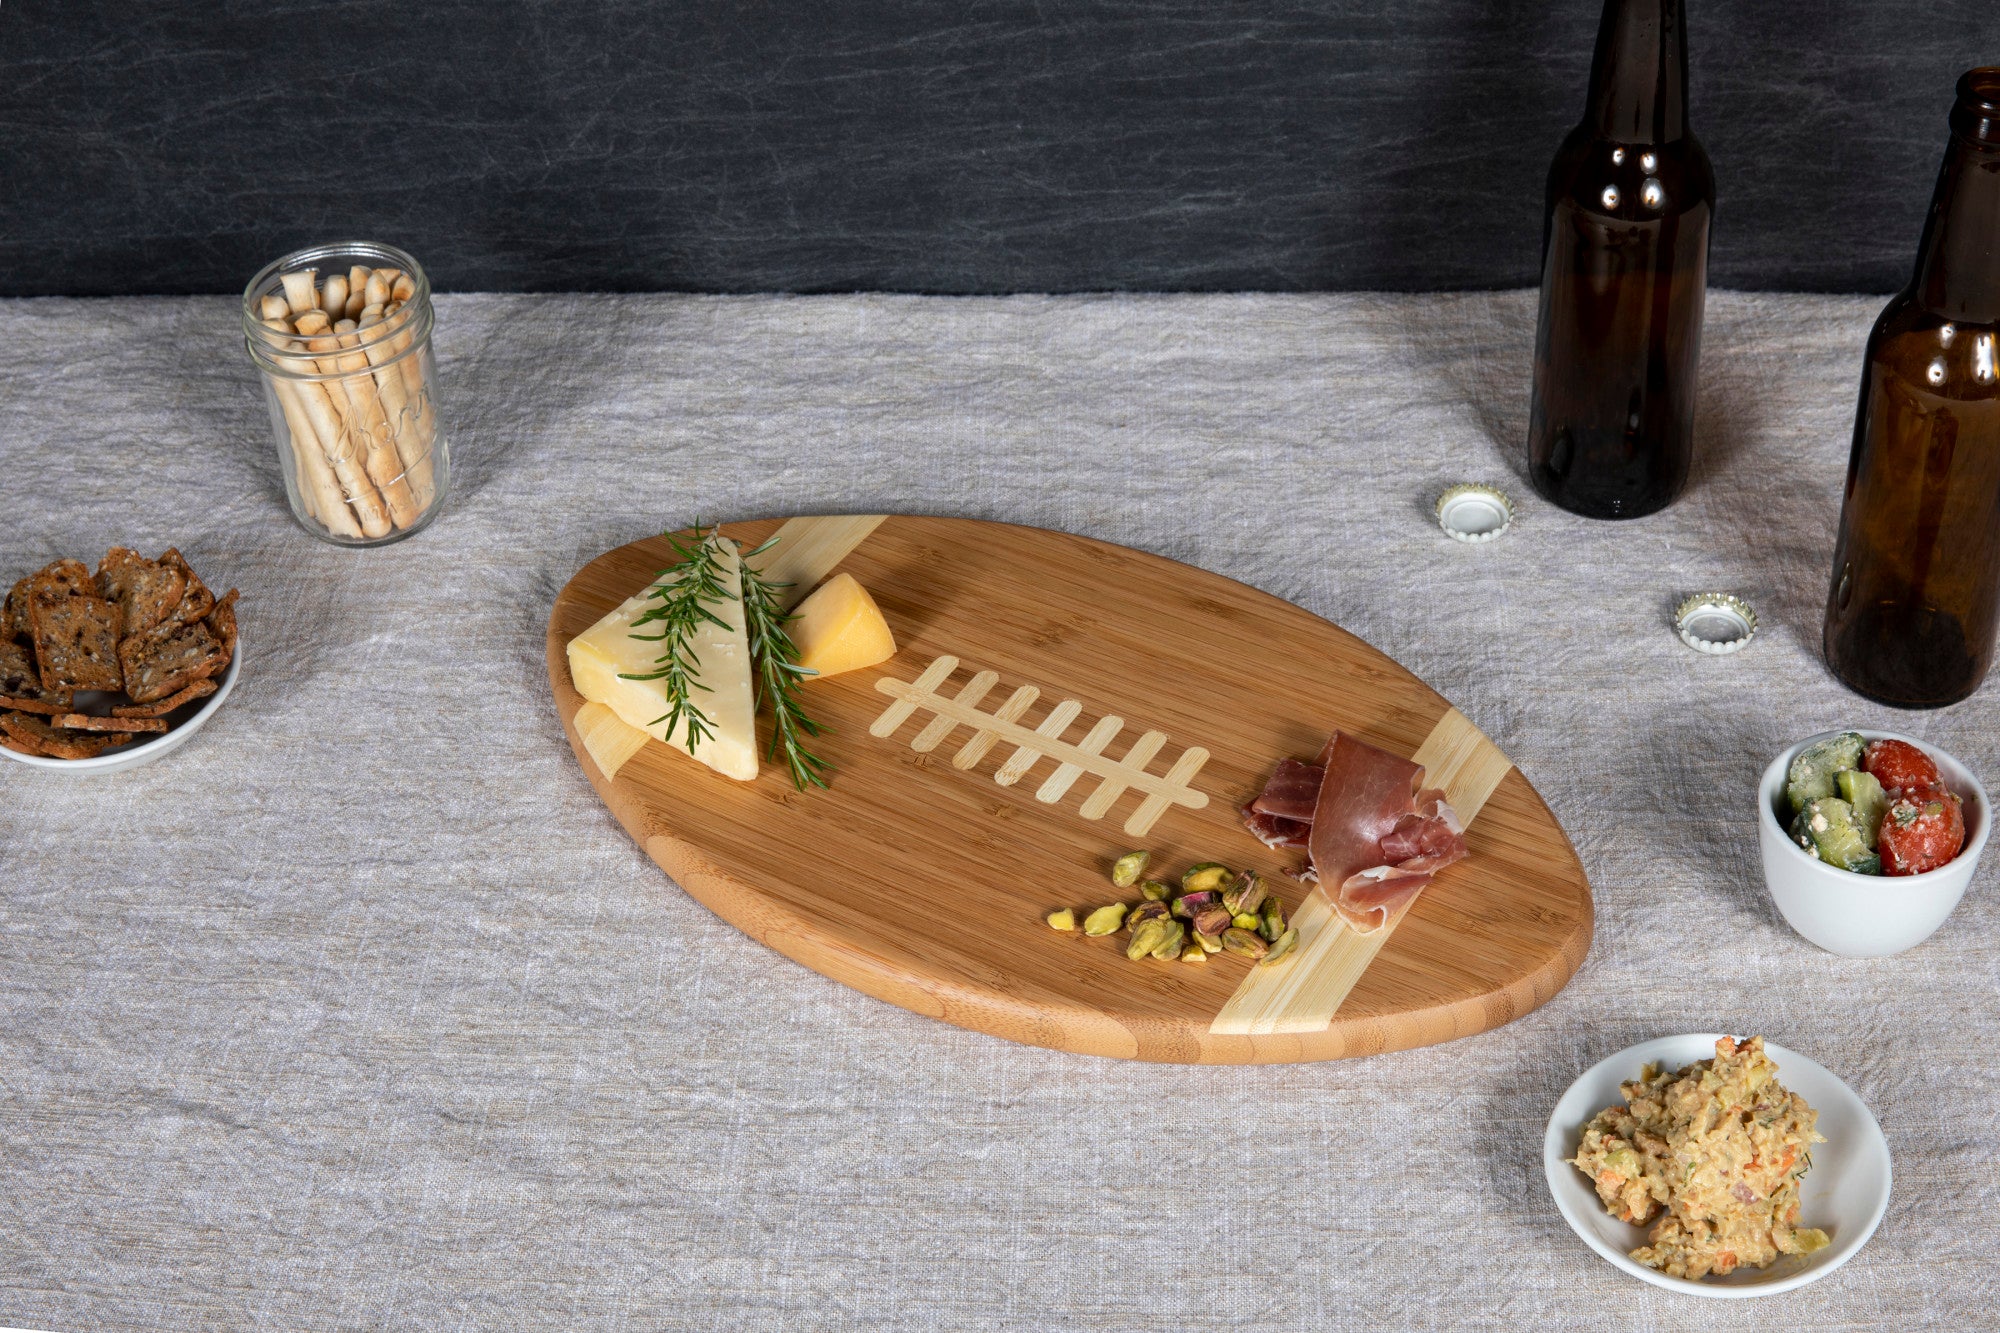 Baylor Bears - Touchdown! Football Cutting Board & Serving Tray